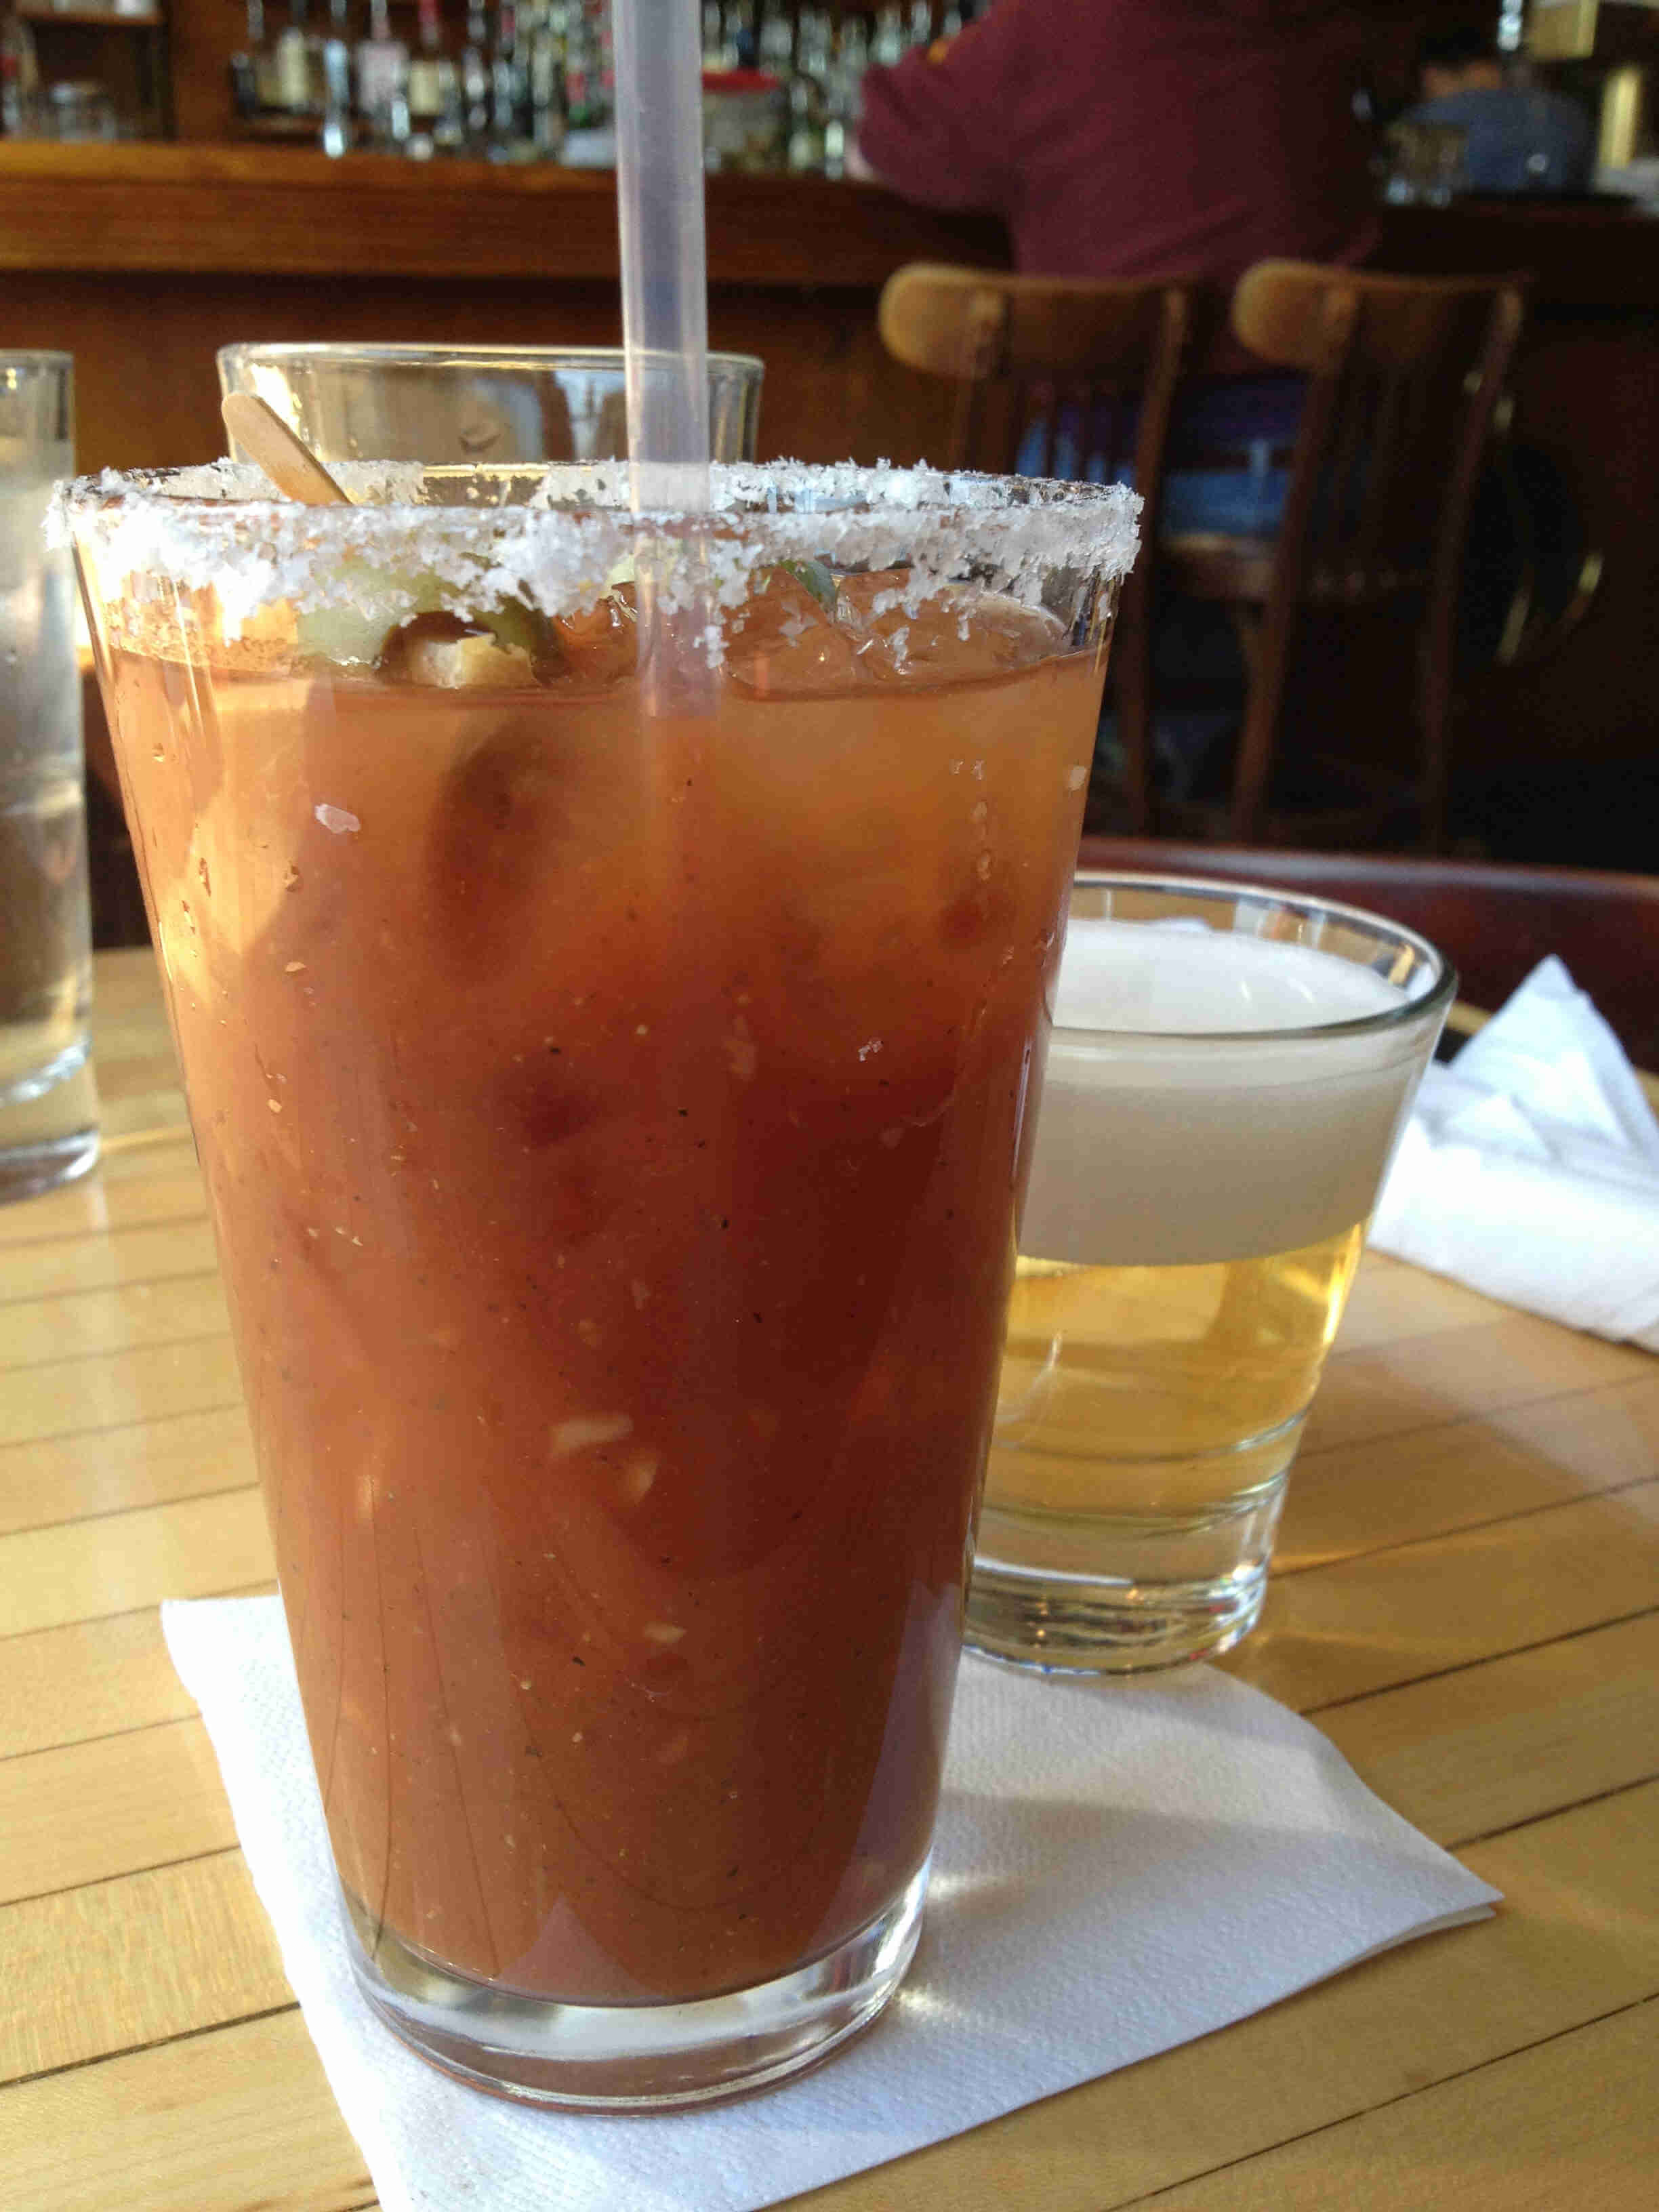 Close up view of a bloody mary drink in a glass, next to a beer chaser, on a table inside a bar